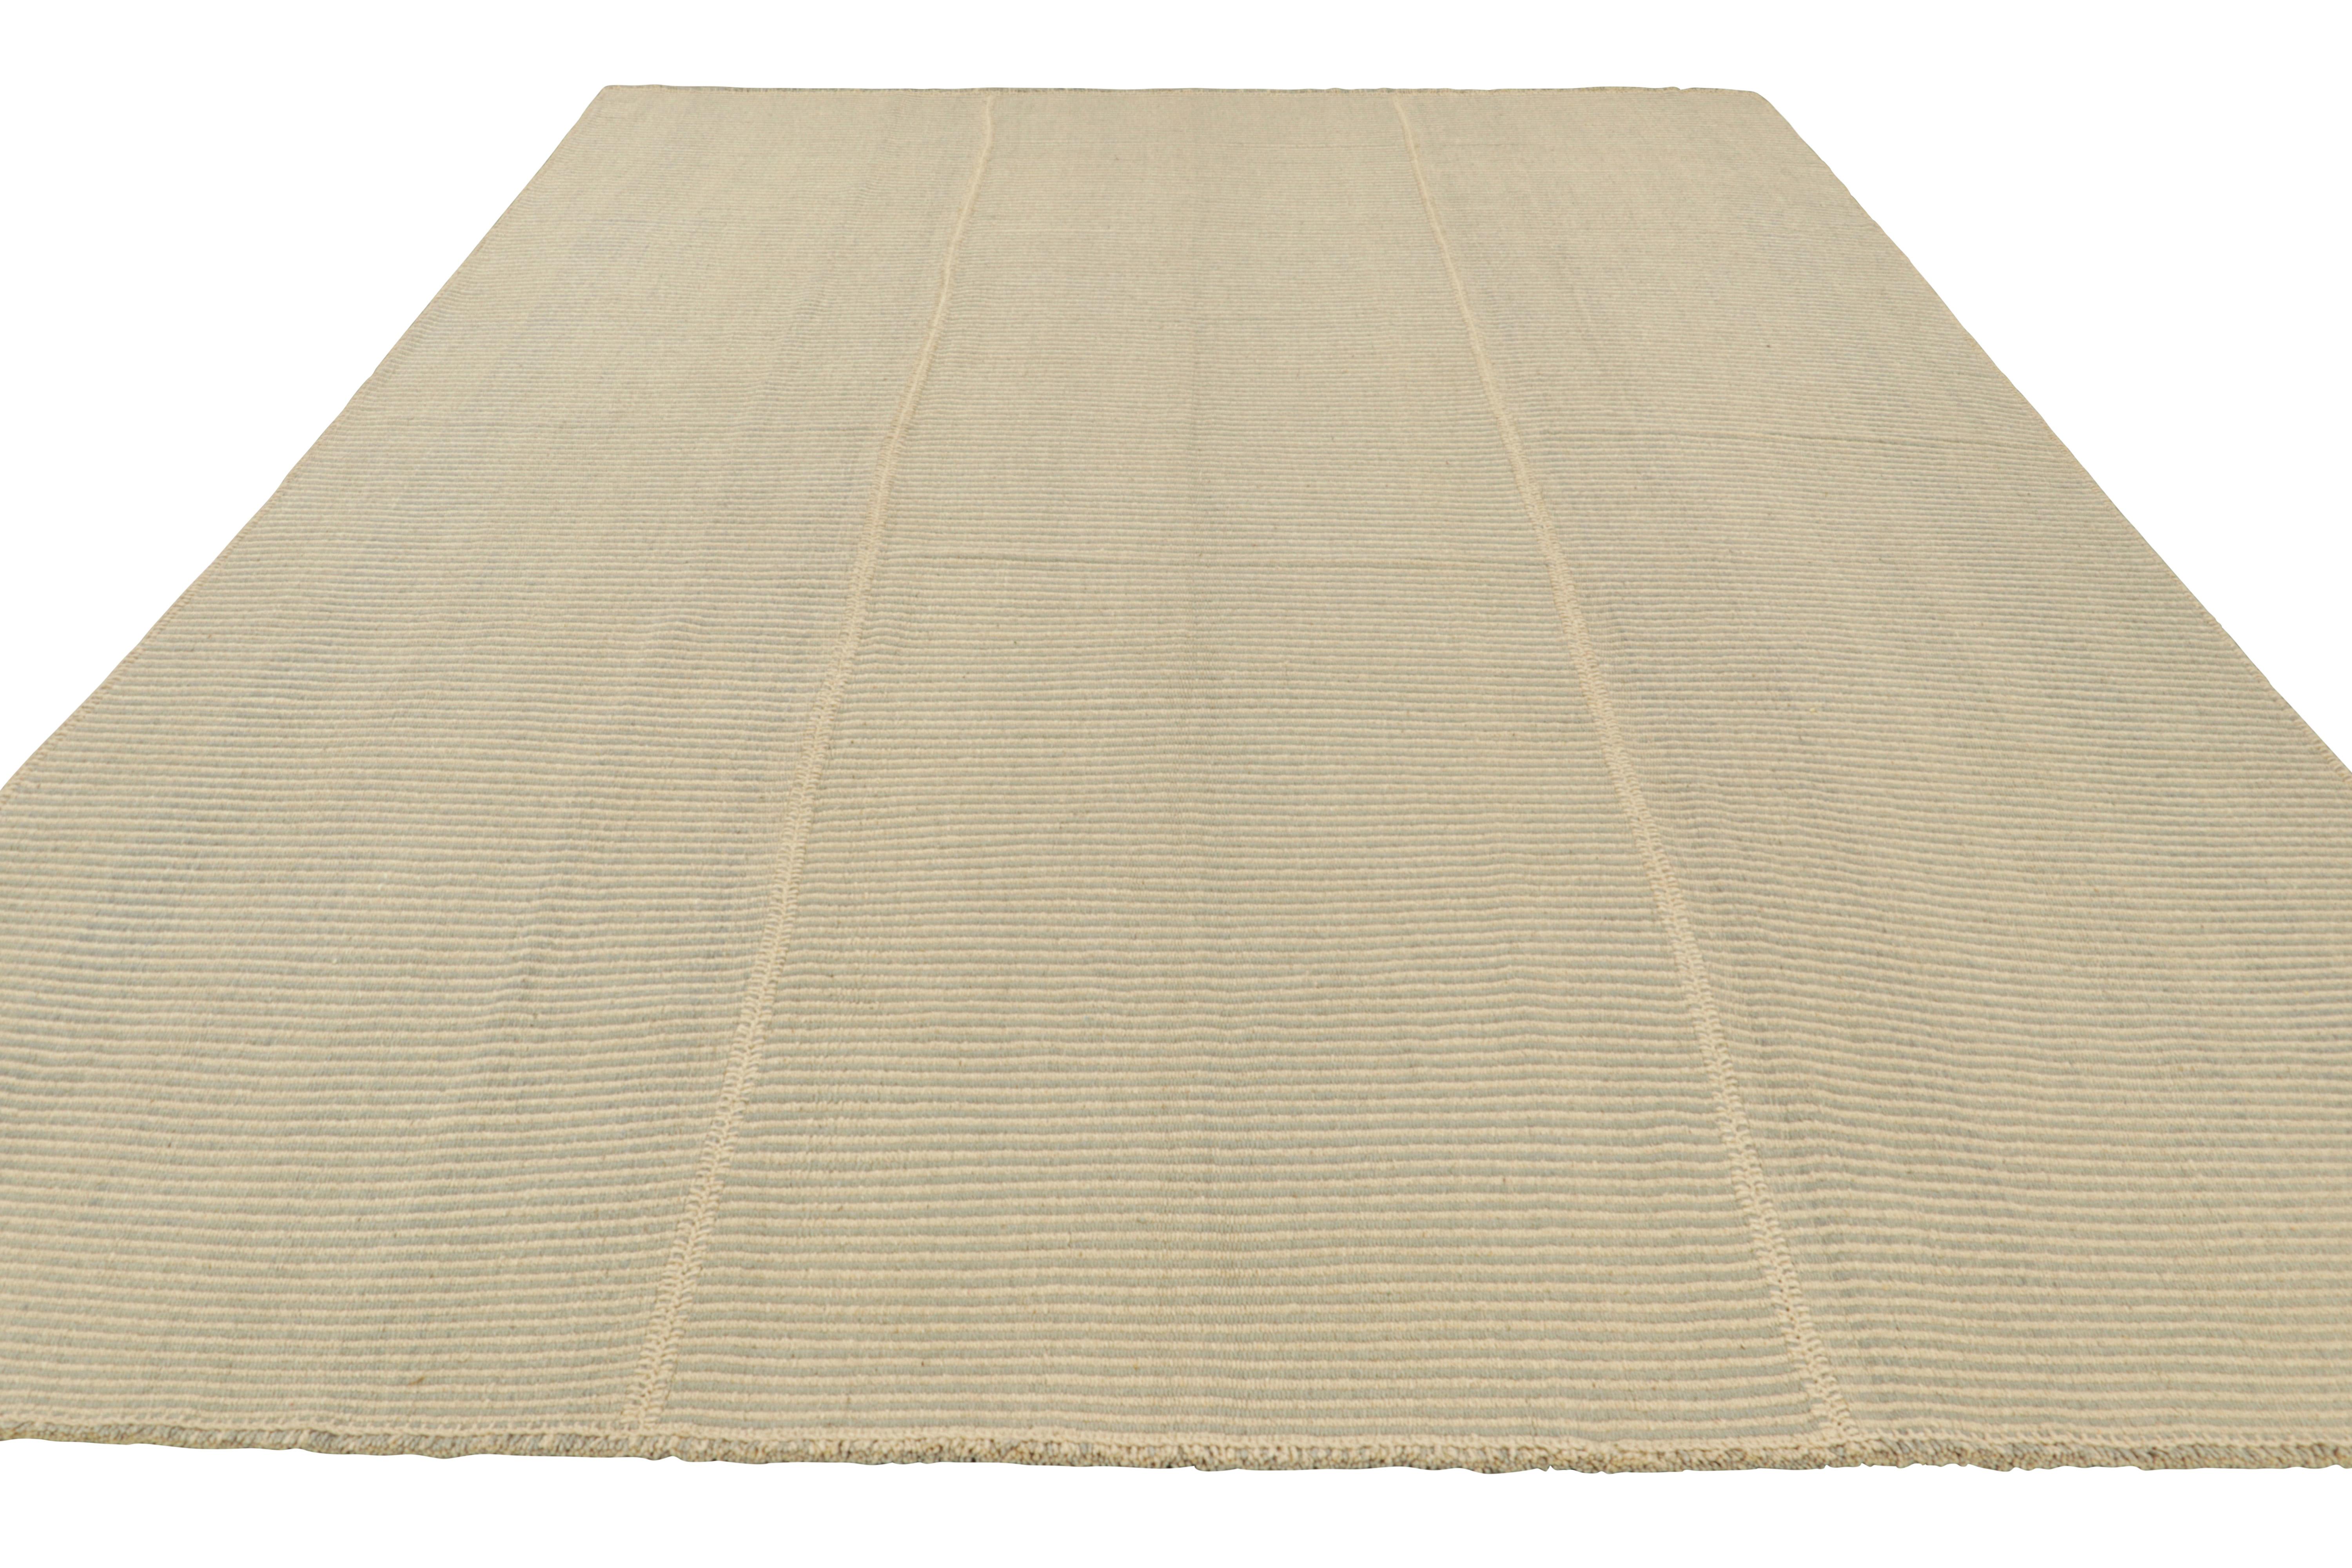 Hand-Woven Rug & Kilim’s Contemporary Kilim in Beige-Brown Textural Stripes For Sale